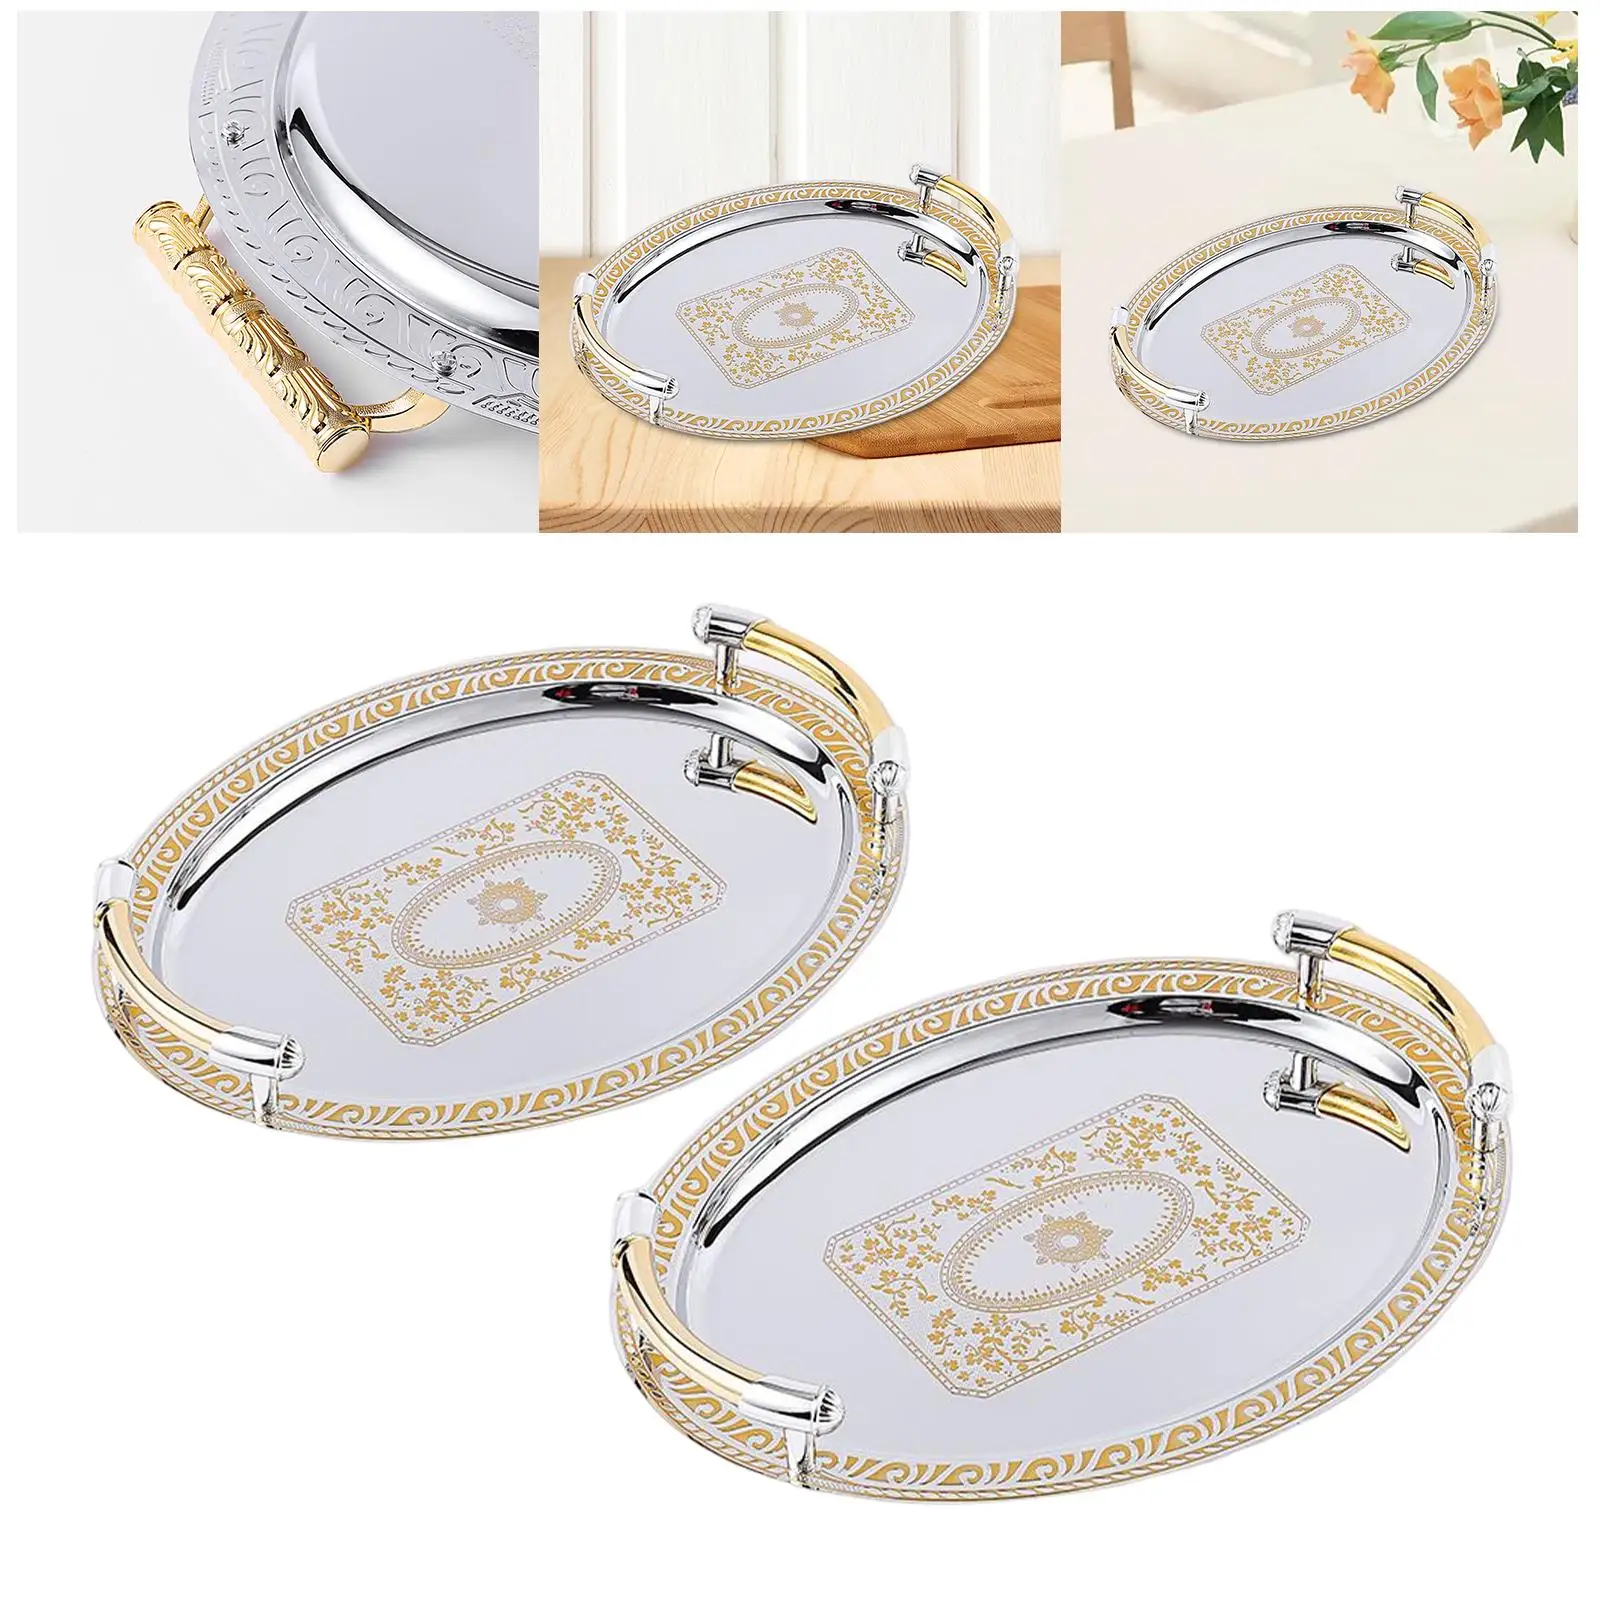 Multi Purpose Vanity Platter Breakfast Tray with Handles Oval Serving Tray for Party Table Countertop Bathroom Living Room